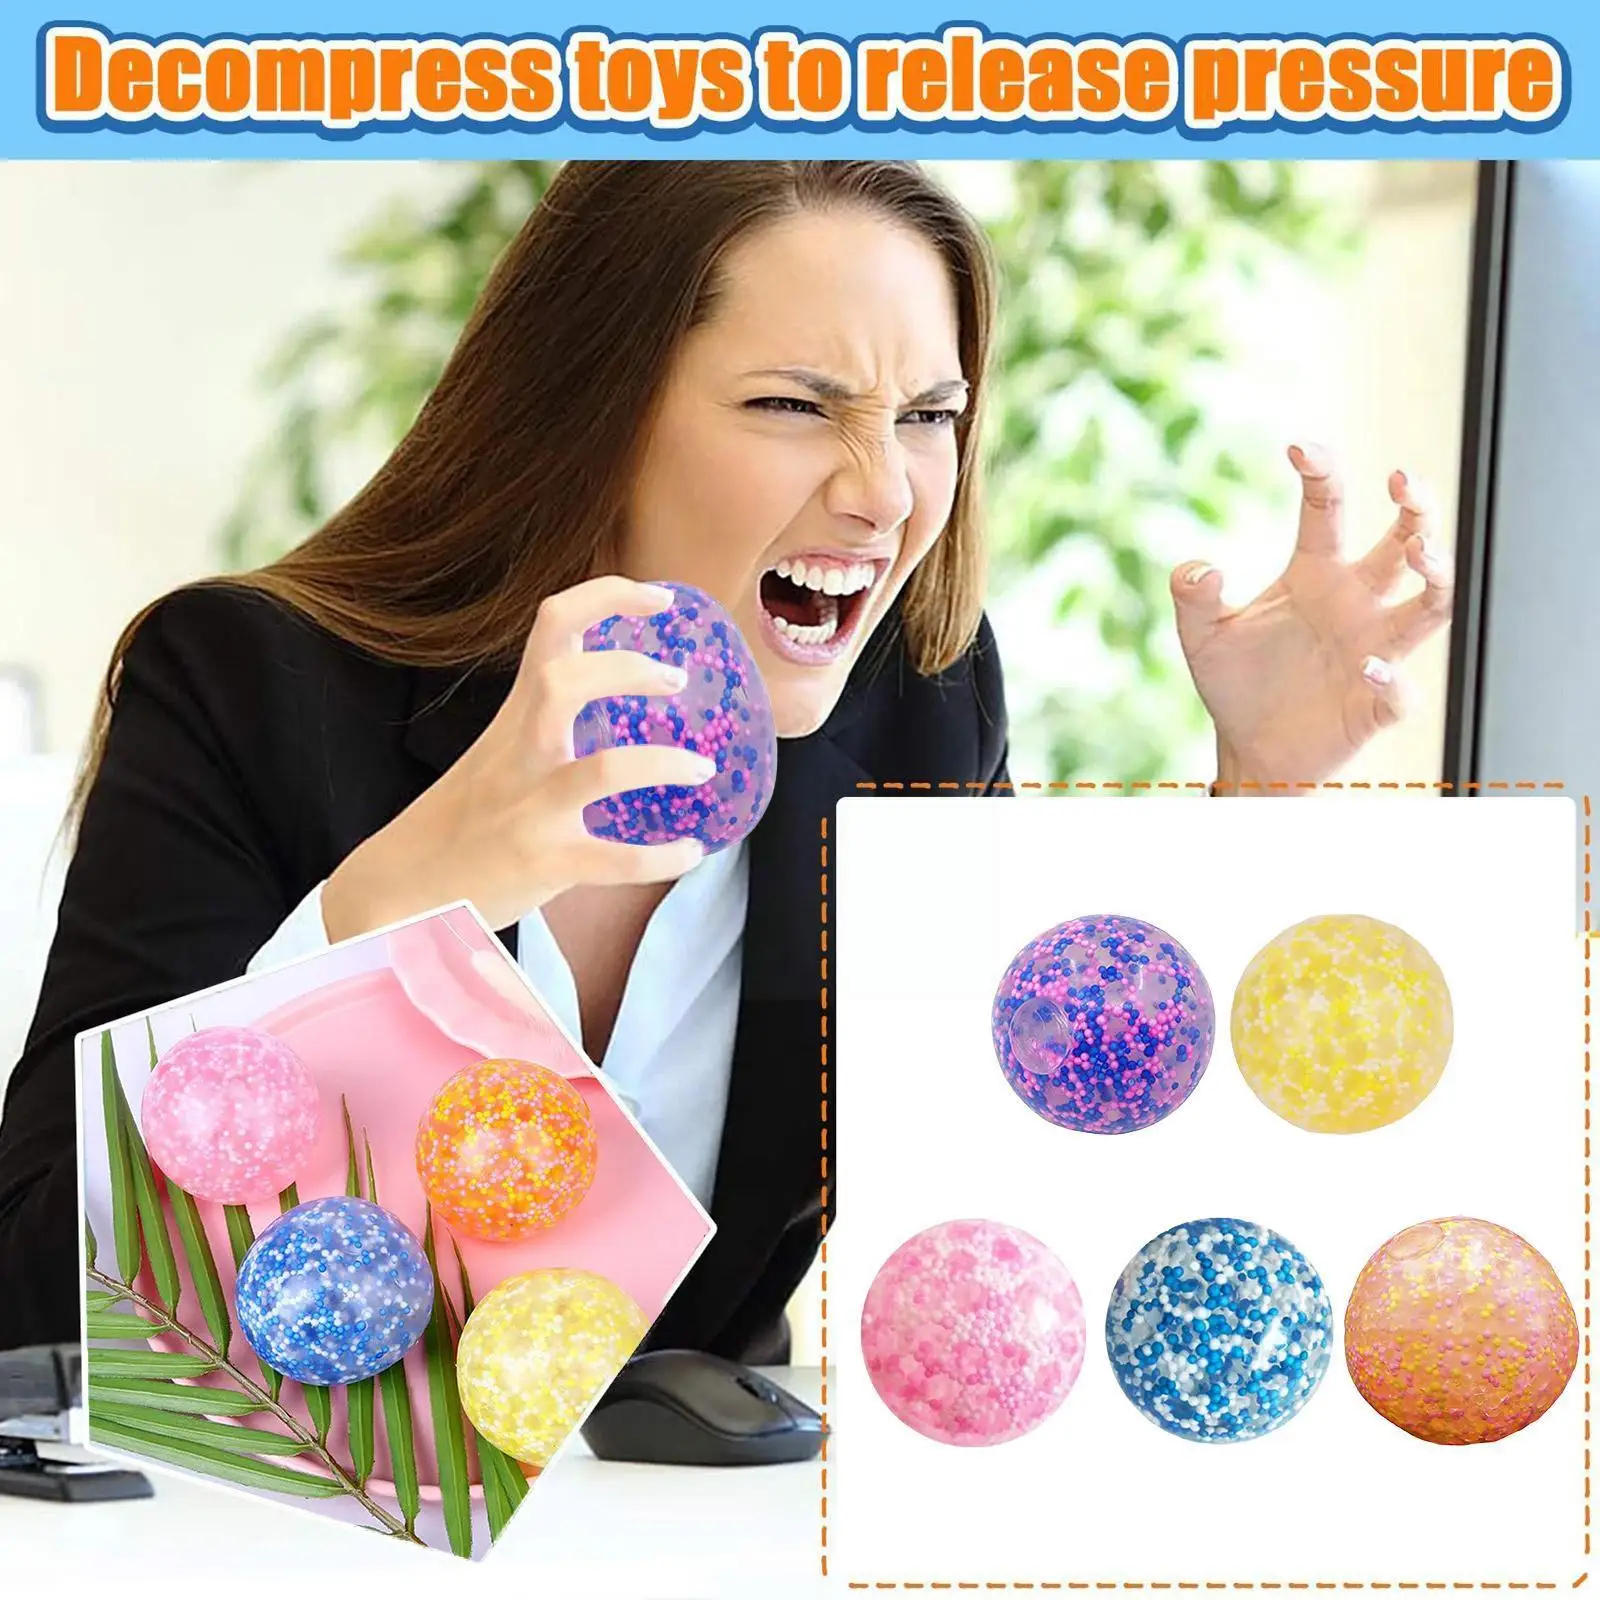 

Stress Relief Squeezing Balls for Kids and Adults Anti-Stress Squishy Color Balls with Water Beads Alleviate Tension Toy T1W9